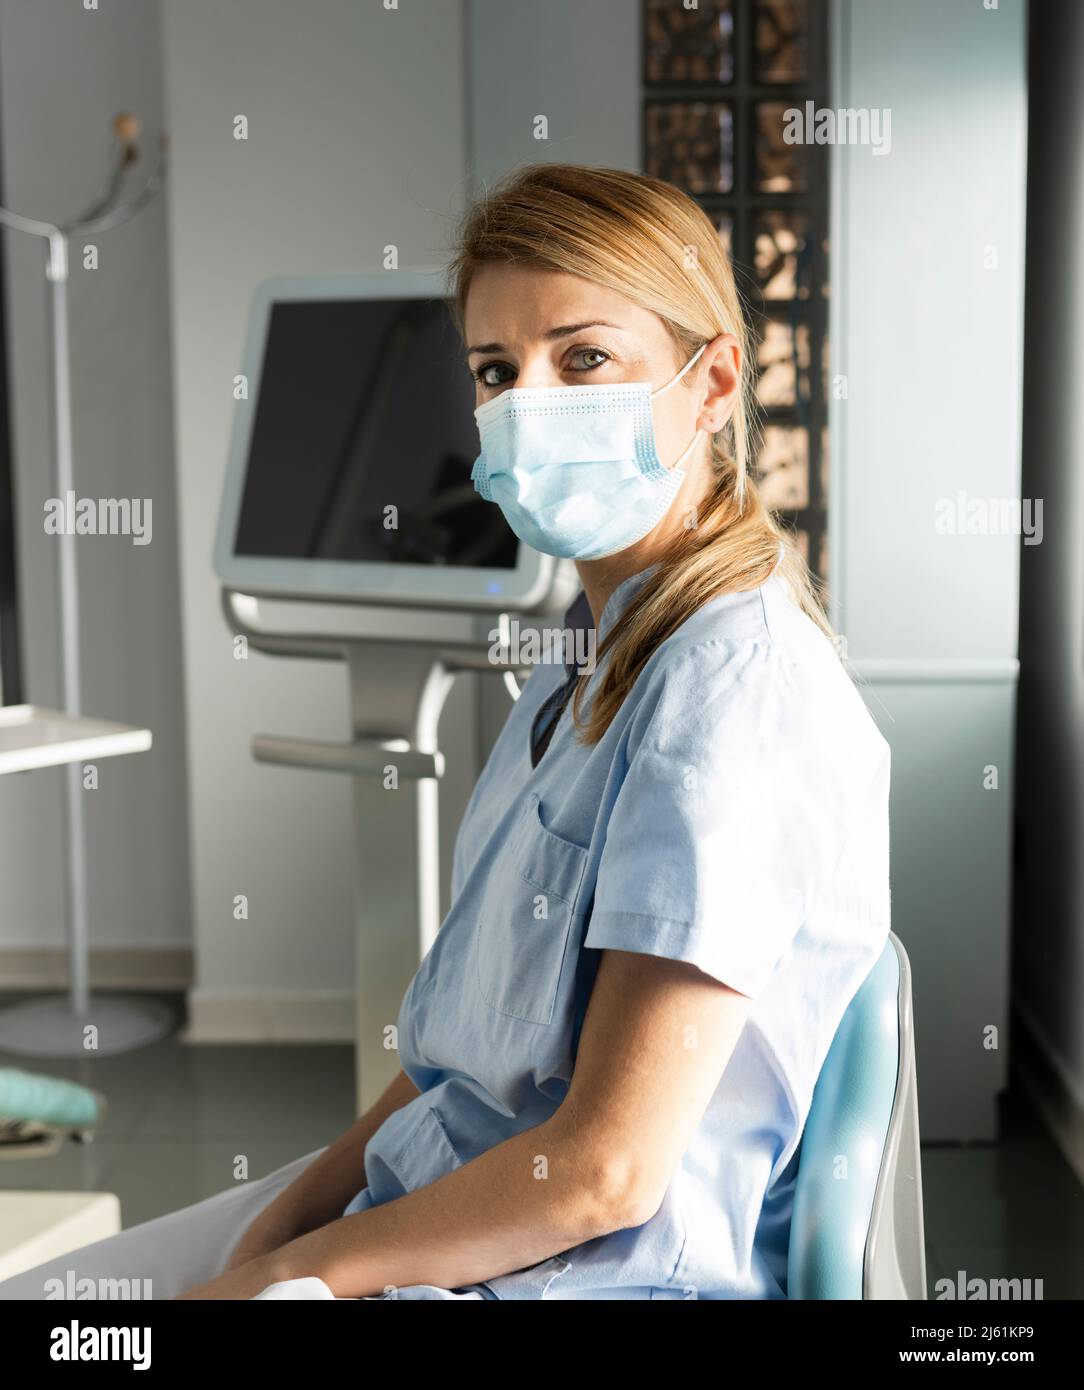 Dentist with protective face mask sitting on chair at dental clinic Stock Photo